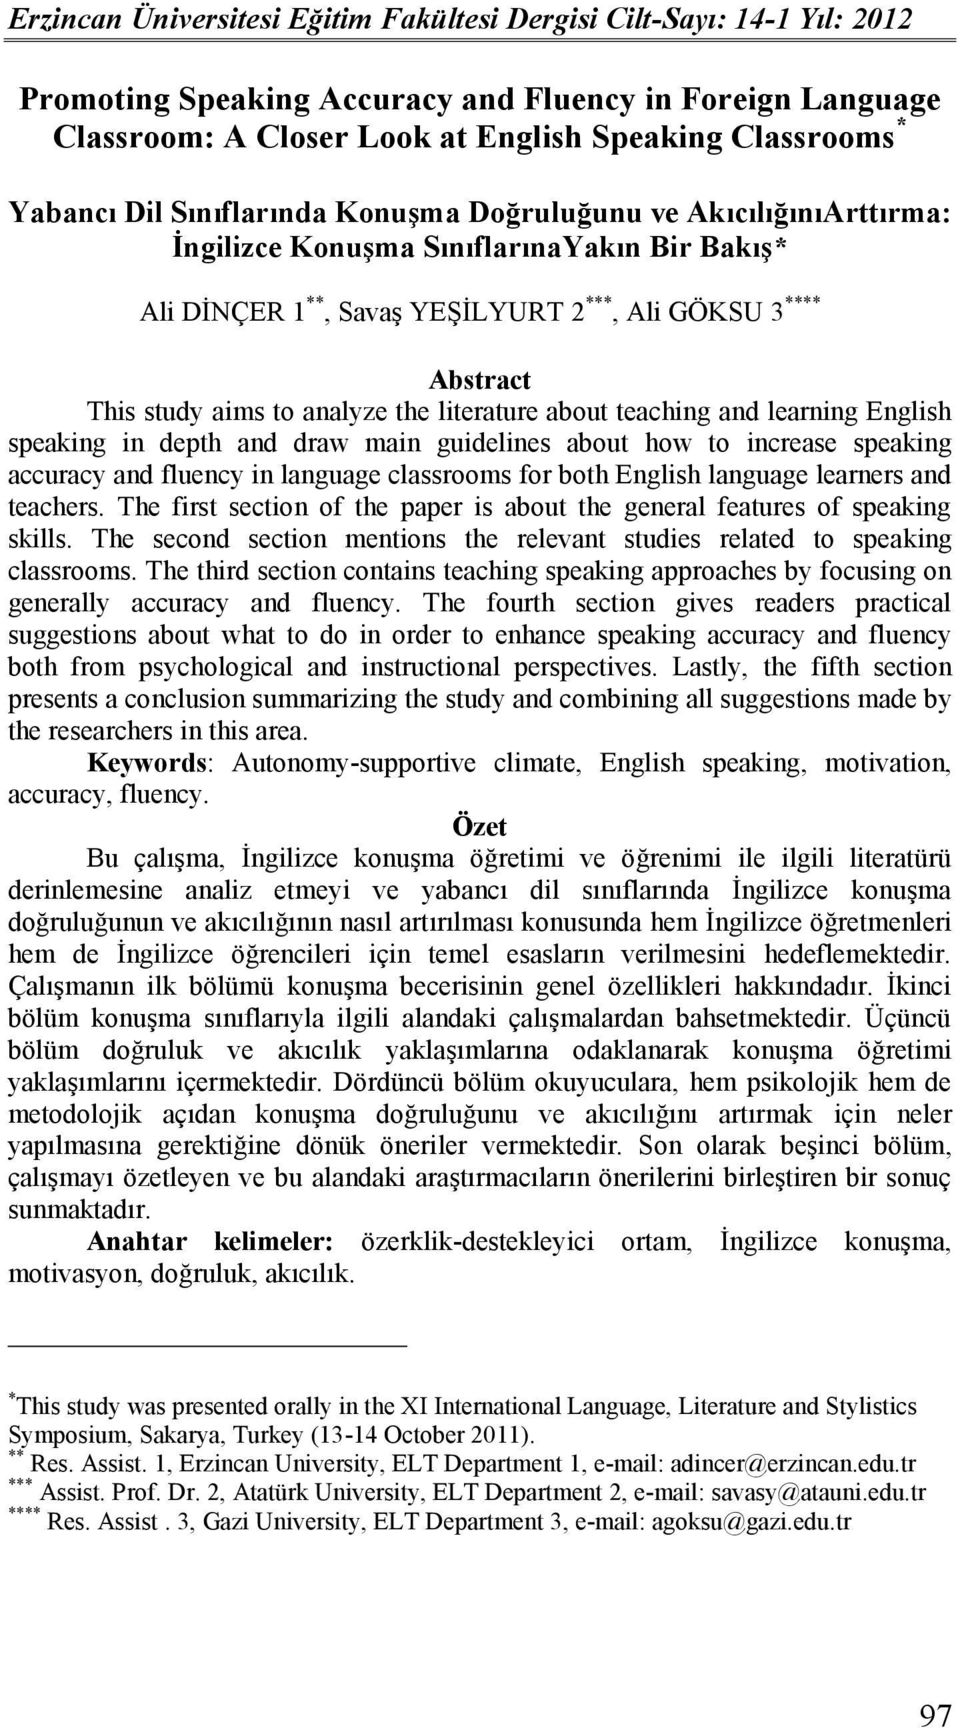 the literature about teaching and learning English speaking in depth and draw main guidelines about how to increase speaking accuracy and fluency in language classrooms for both English language